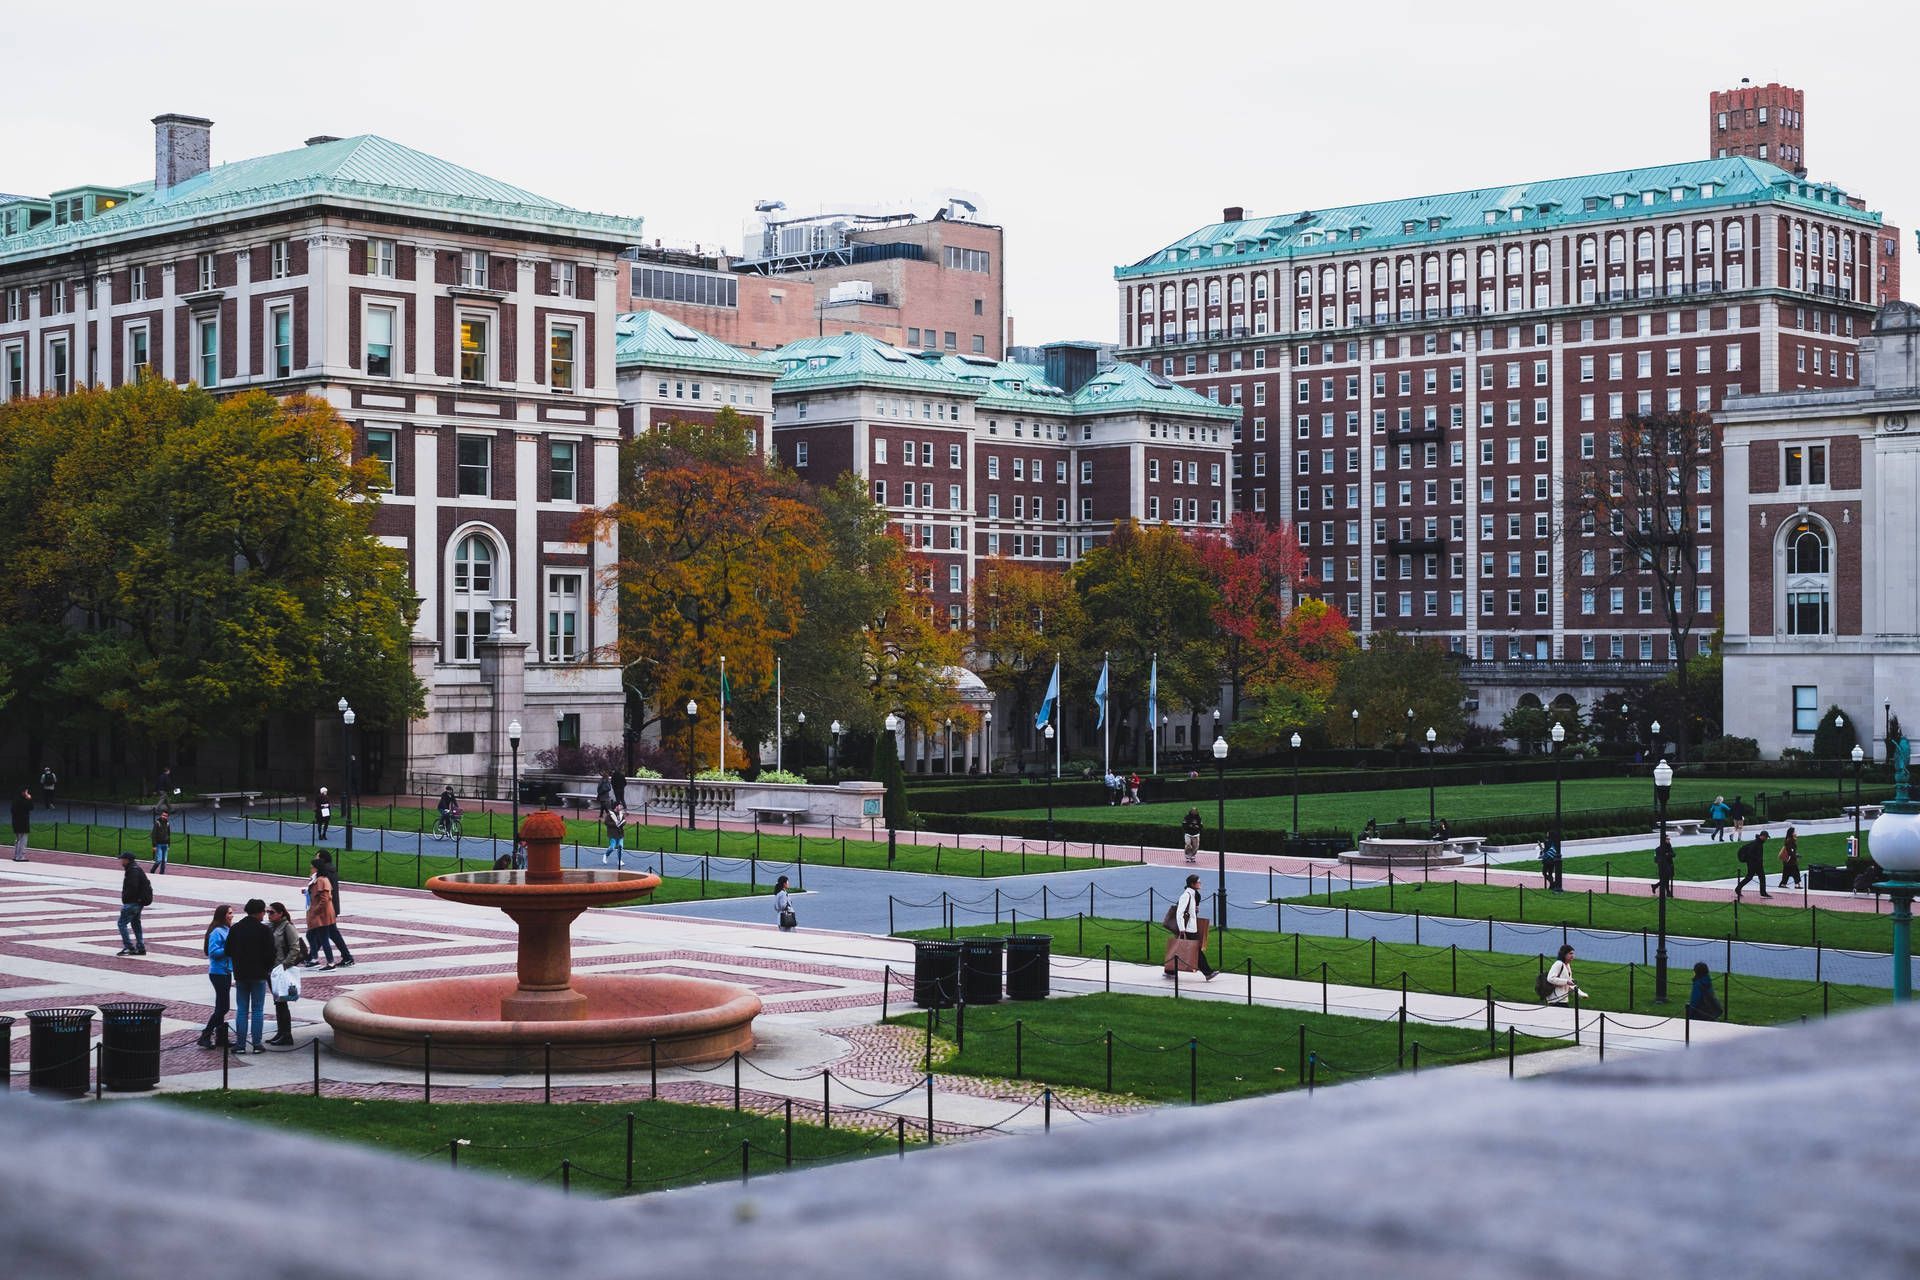 A red fountain in the middle of a green lawn in front of a large building. - Columbia University